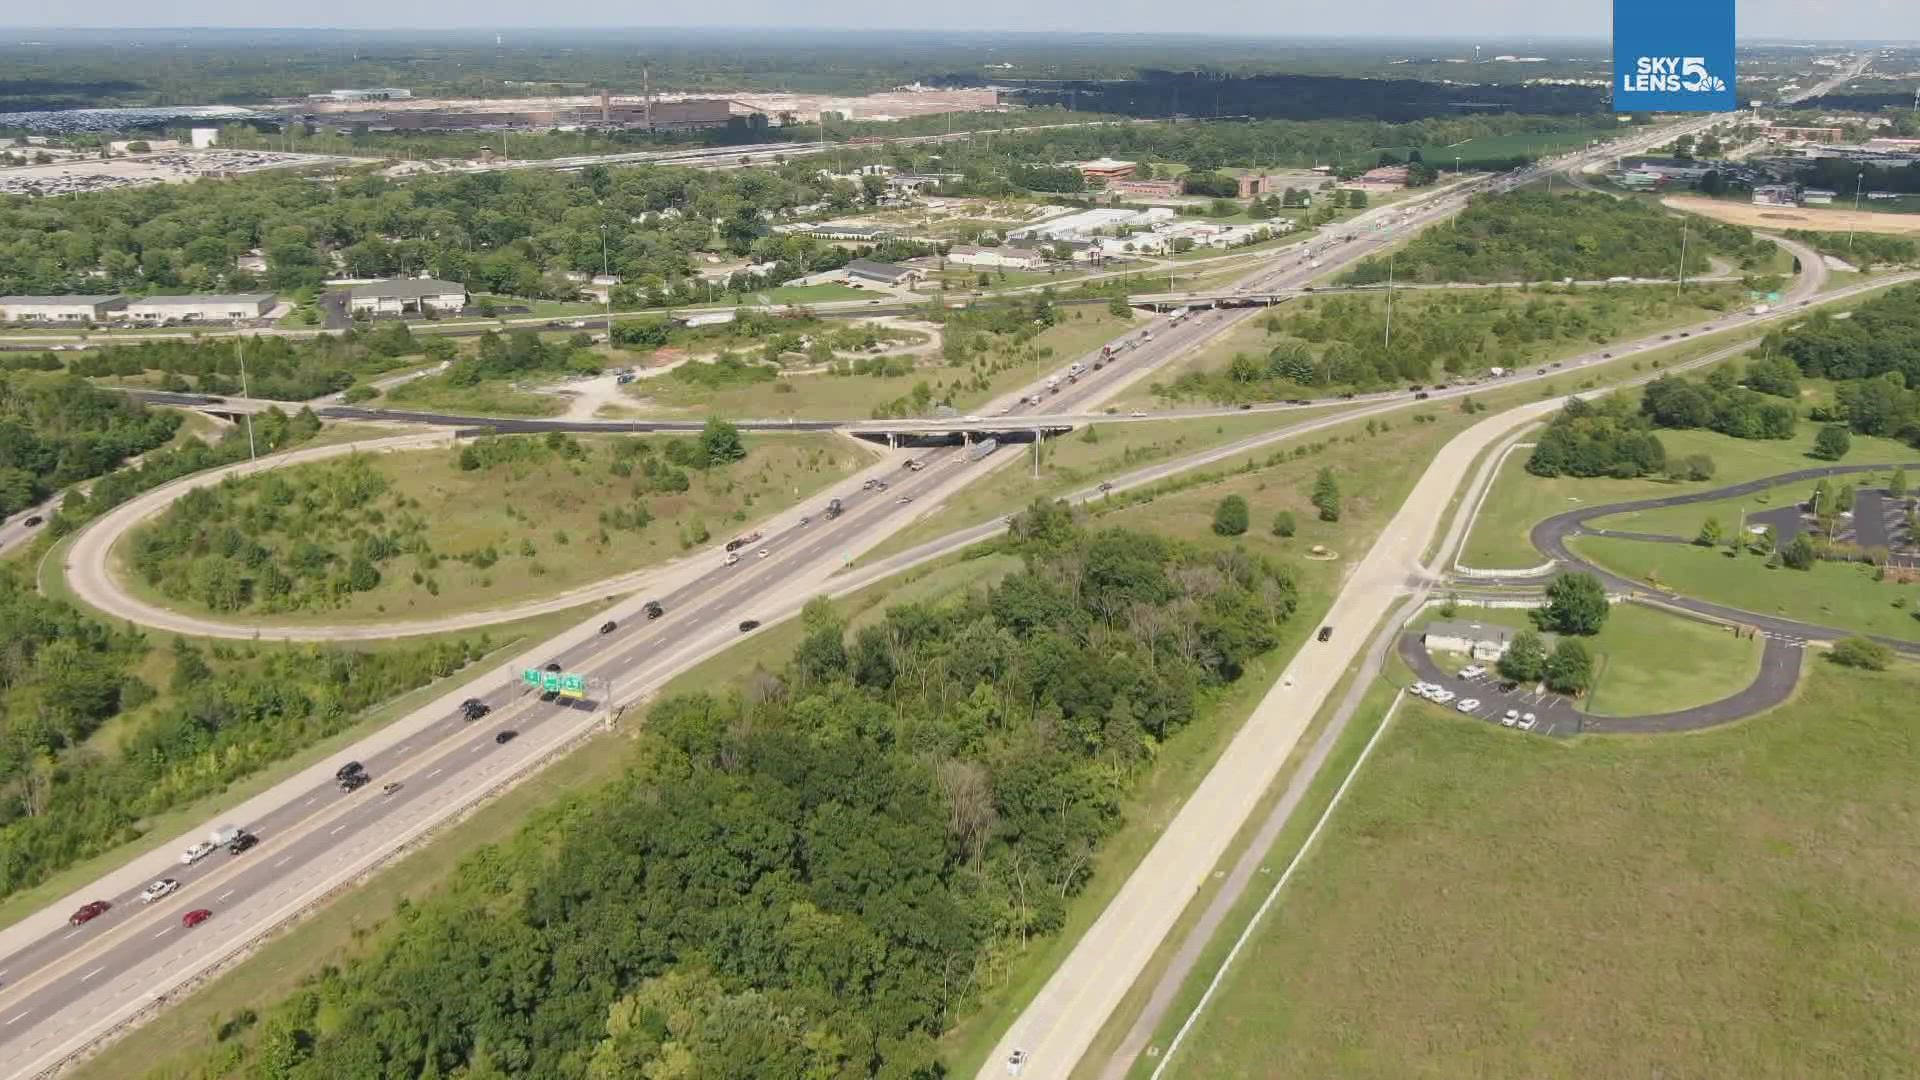 MoDOT says they are still about a year away from finalizing the plan. Once it's finished, it should keep up with traffic for at least 25 years.